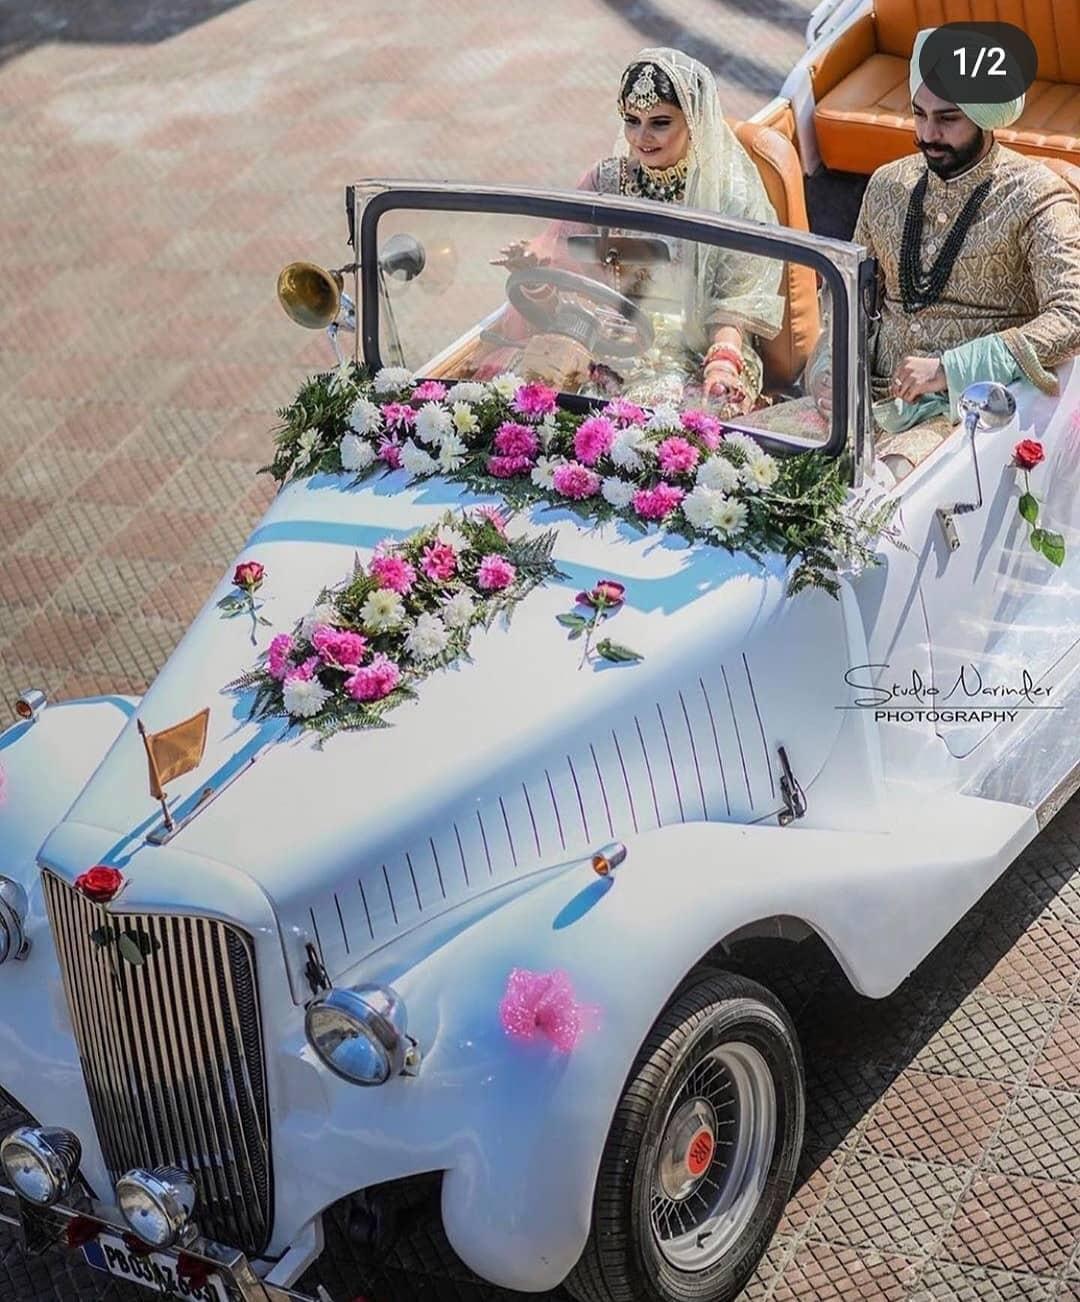 Wedding Car Decorations Services With Flower at Best Price in